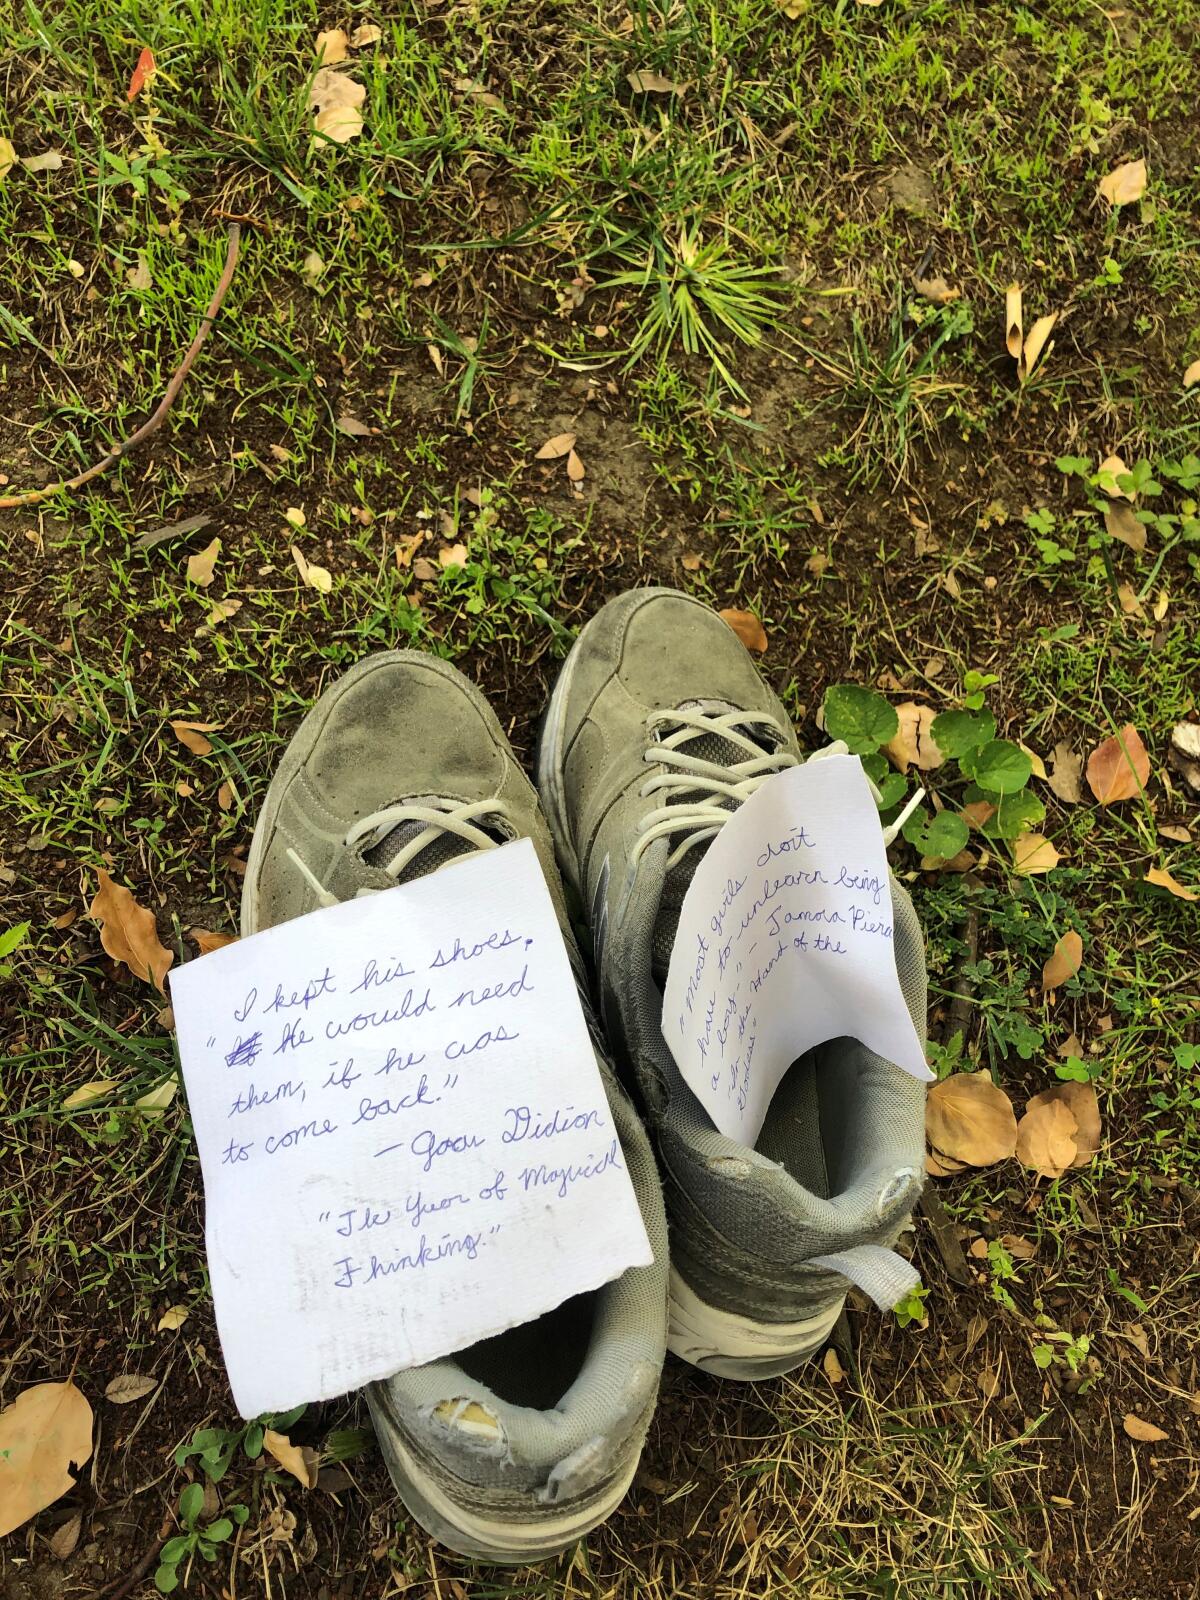 Shoes left on the lawn of Joan Didion's former home in Sacramento.